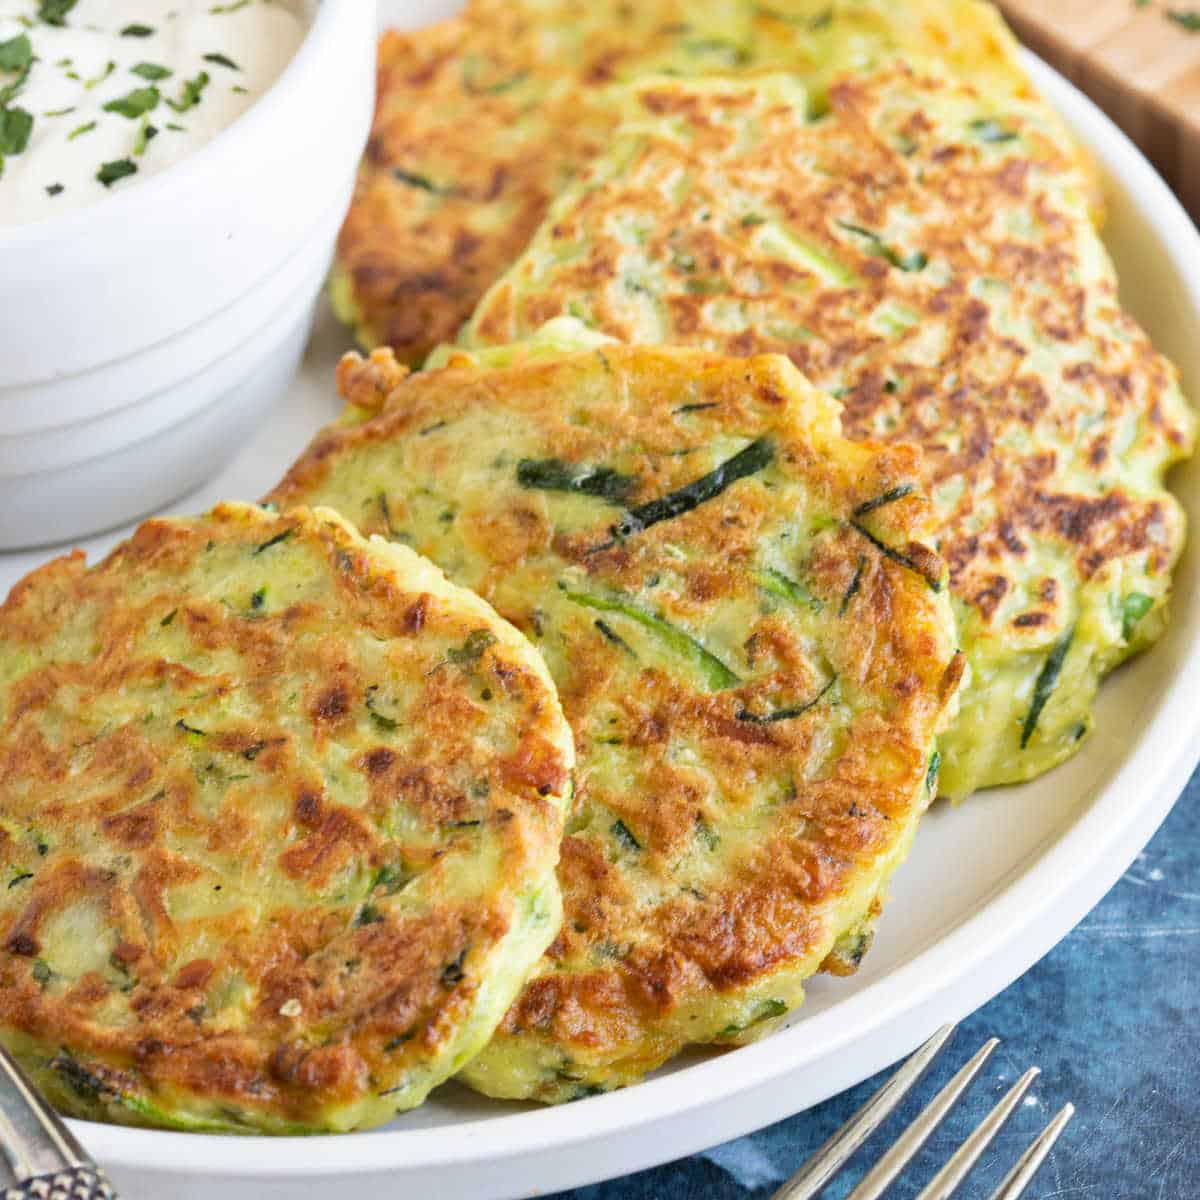 Cheesy courgette fritters are a great way of using up a glut of homegrown courgettes.

Get the recipe => bit.ly/33zhkTL